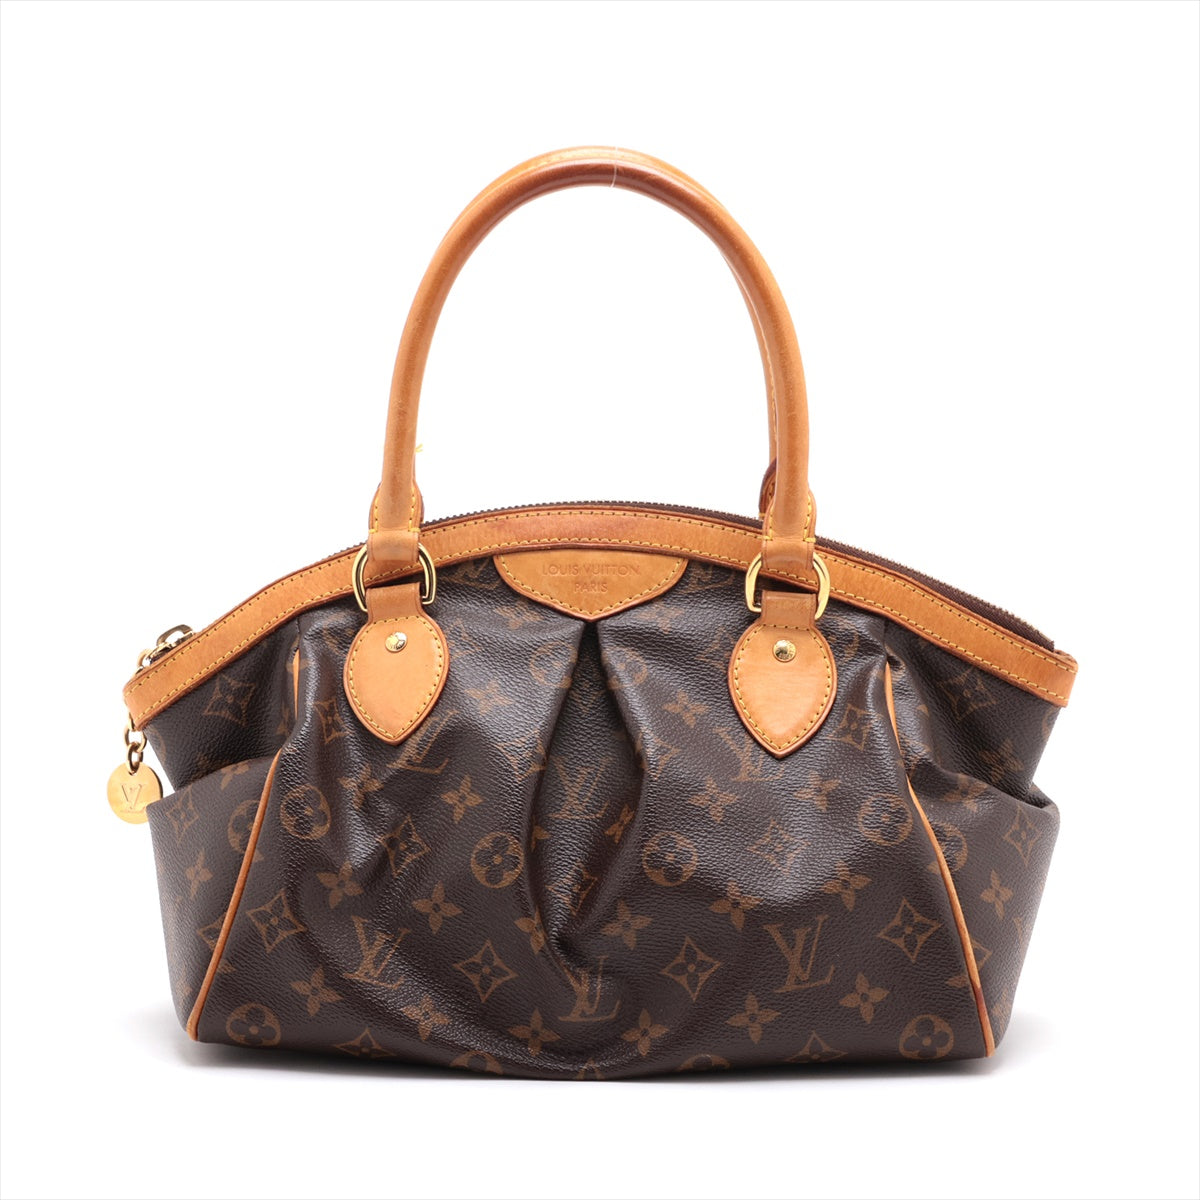 Louis Vuitton Monogram Tivoli PM M40143 Hands-on and Stened